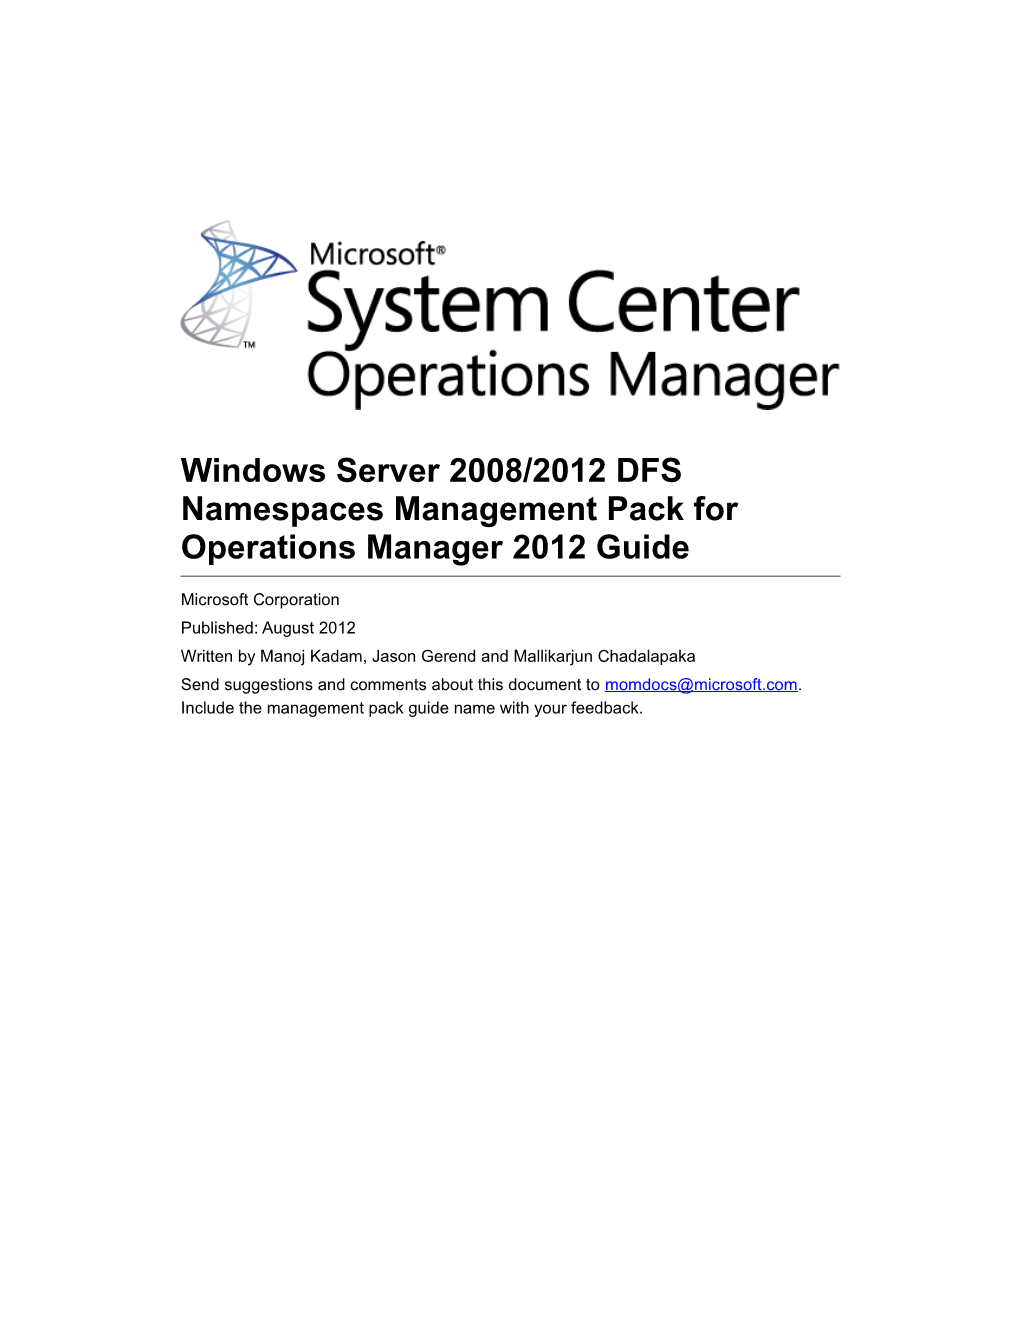 Windows Server2008/2012 DFS Namespaces Management Pack for Operations Manager2012 Guide